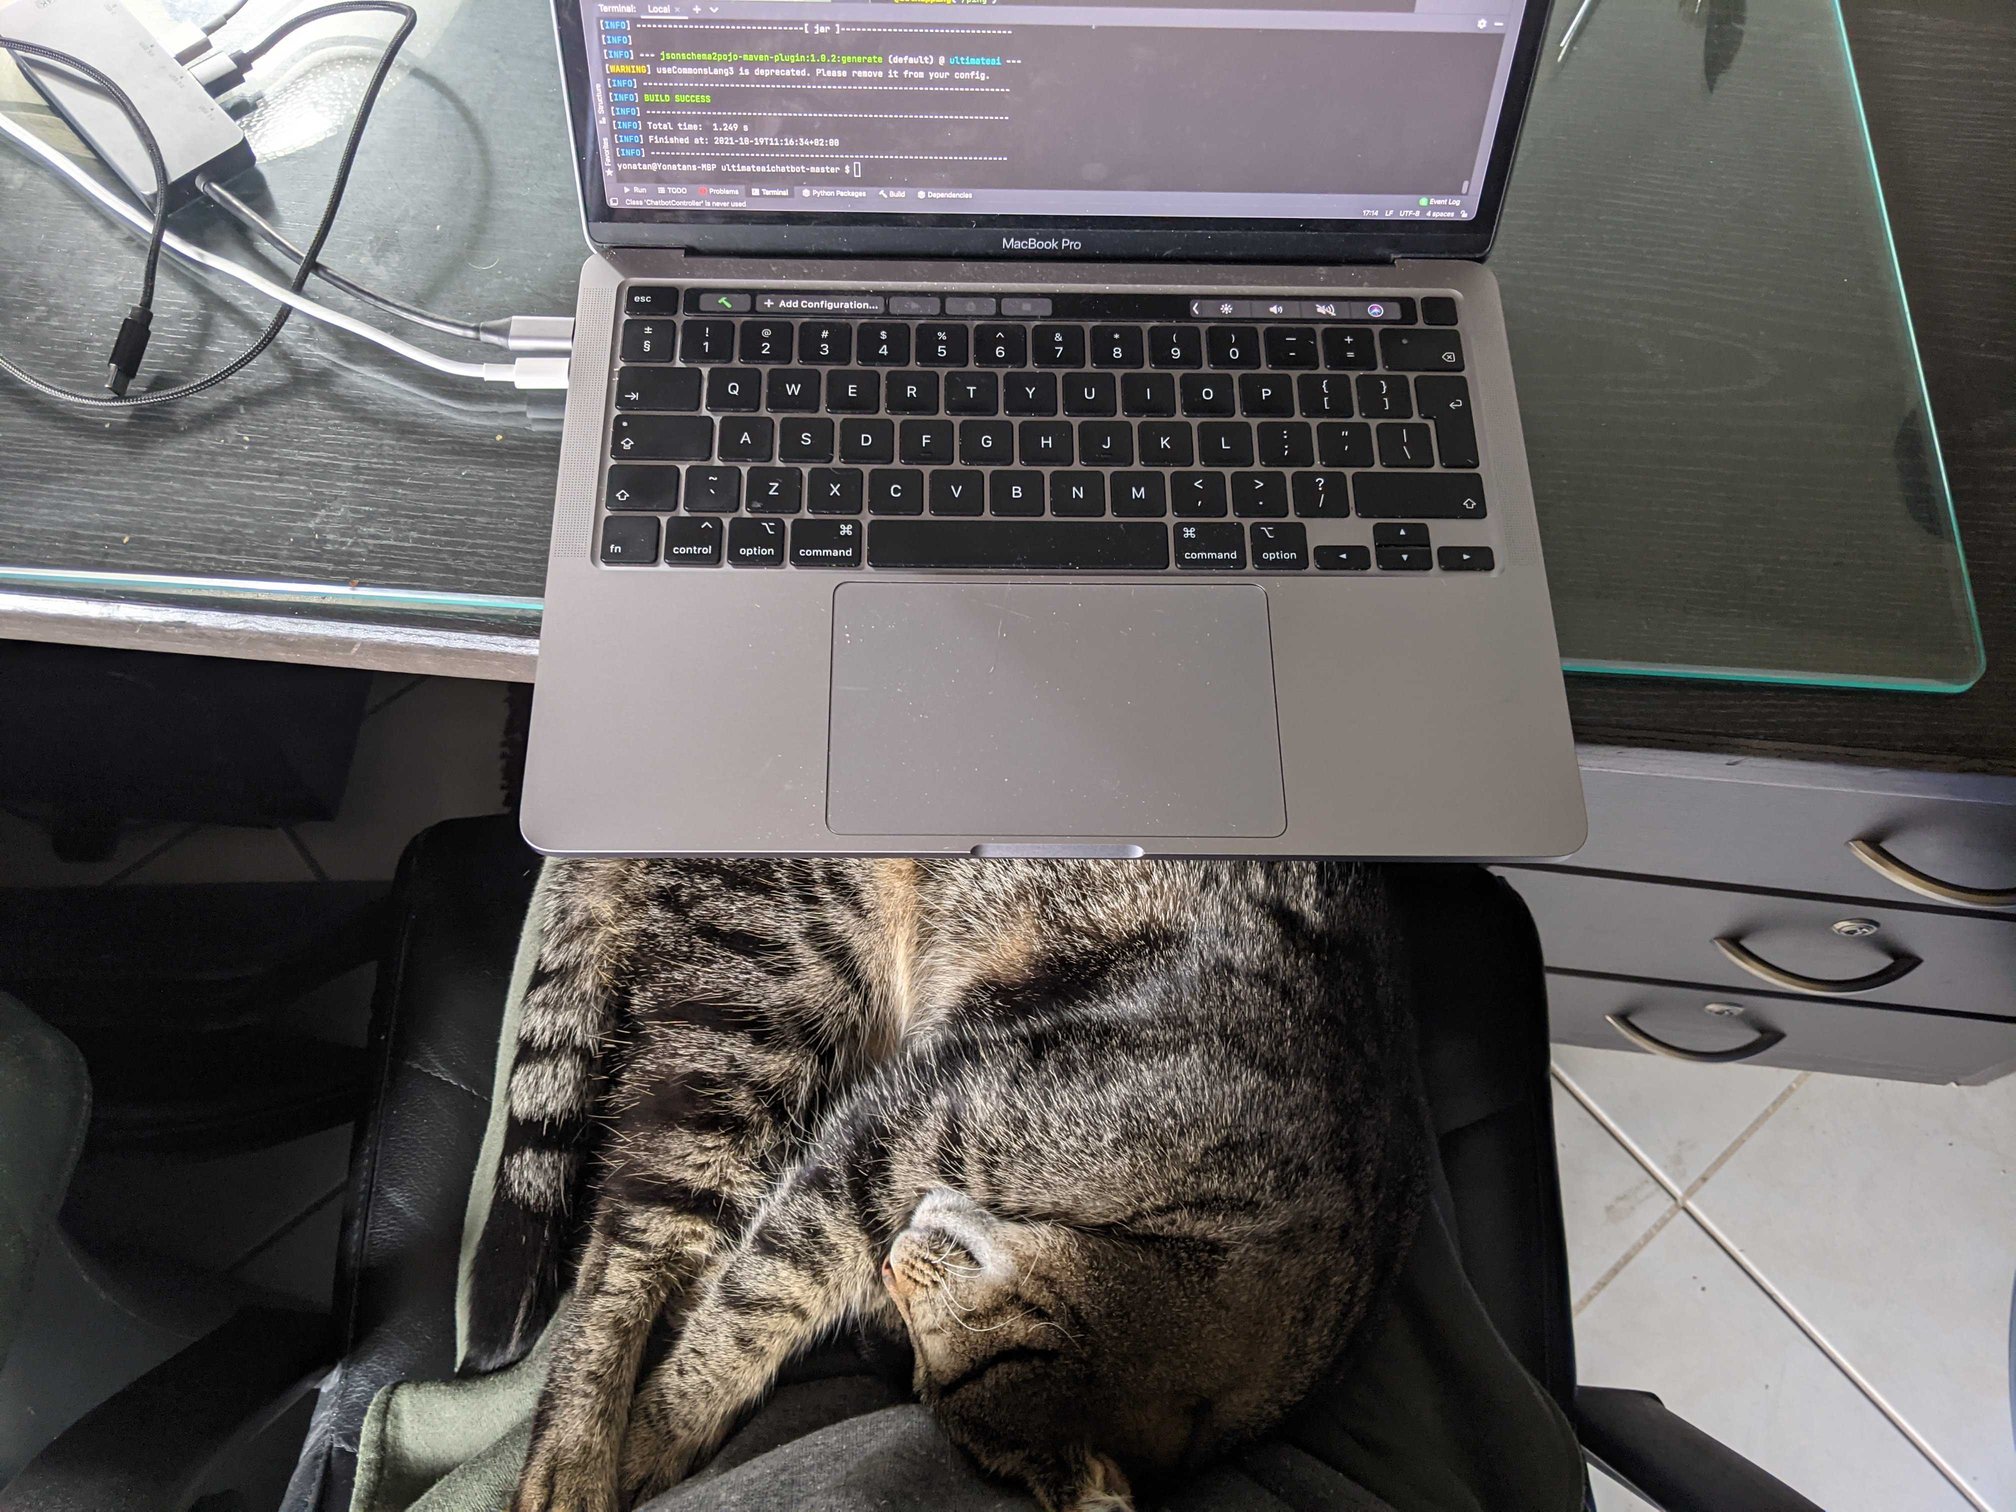 A cat napping on an Ultimate colleague’s lap while they work. 